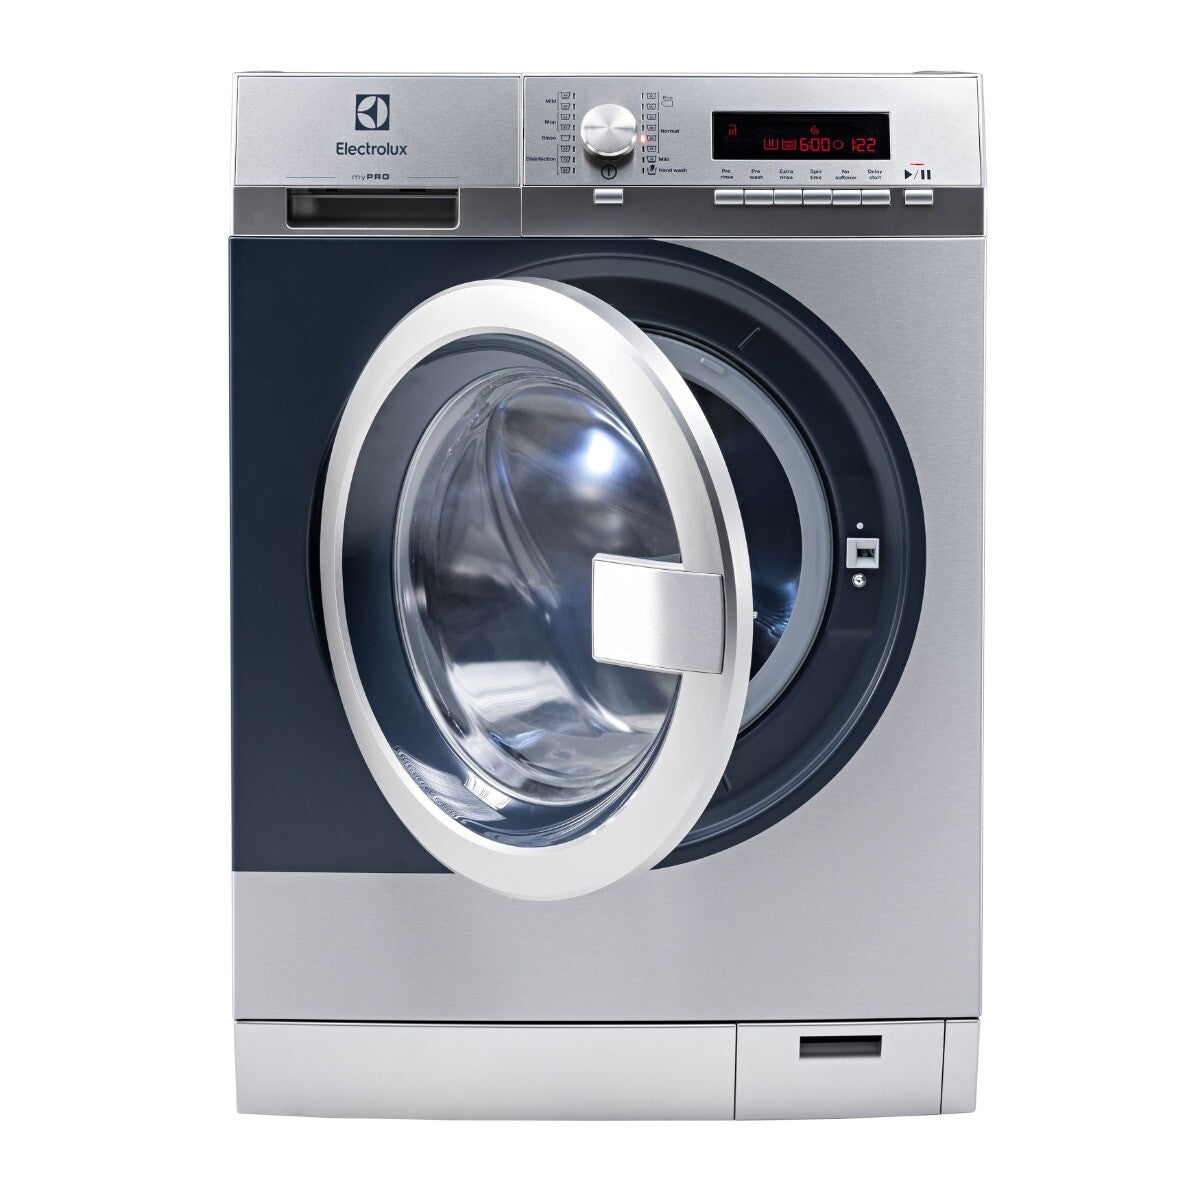 Electrolux Professional TE1120 myPRO Smart Condenser Tumble Dryer, 8kg JD Catering Equipment Solutions Ltd